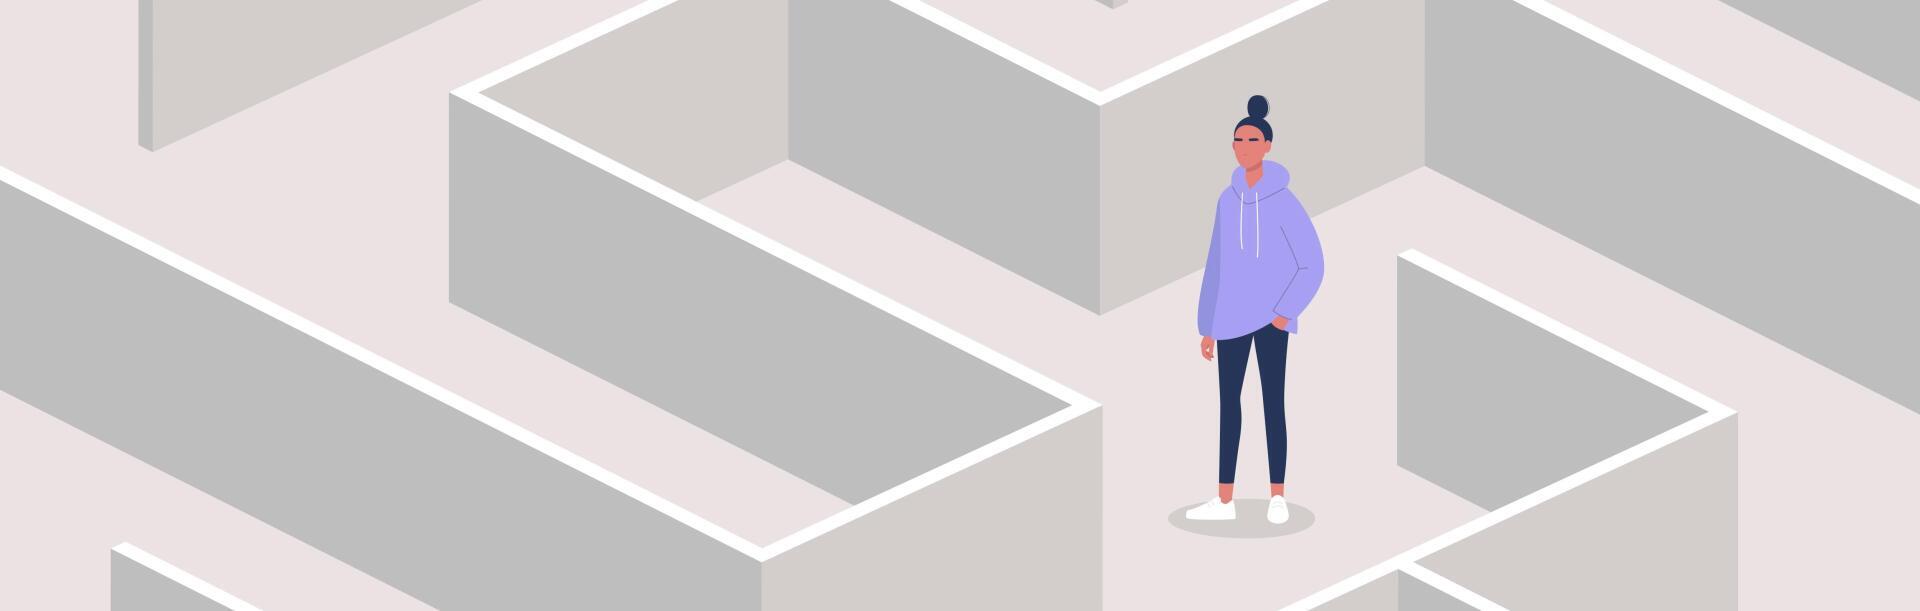 Illustration woman lost in a maze